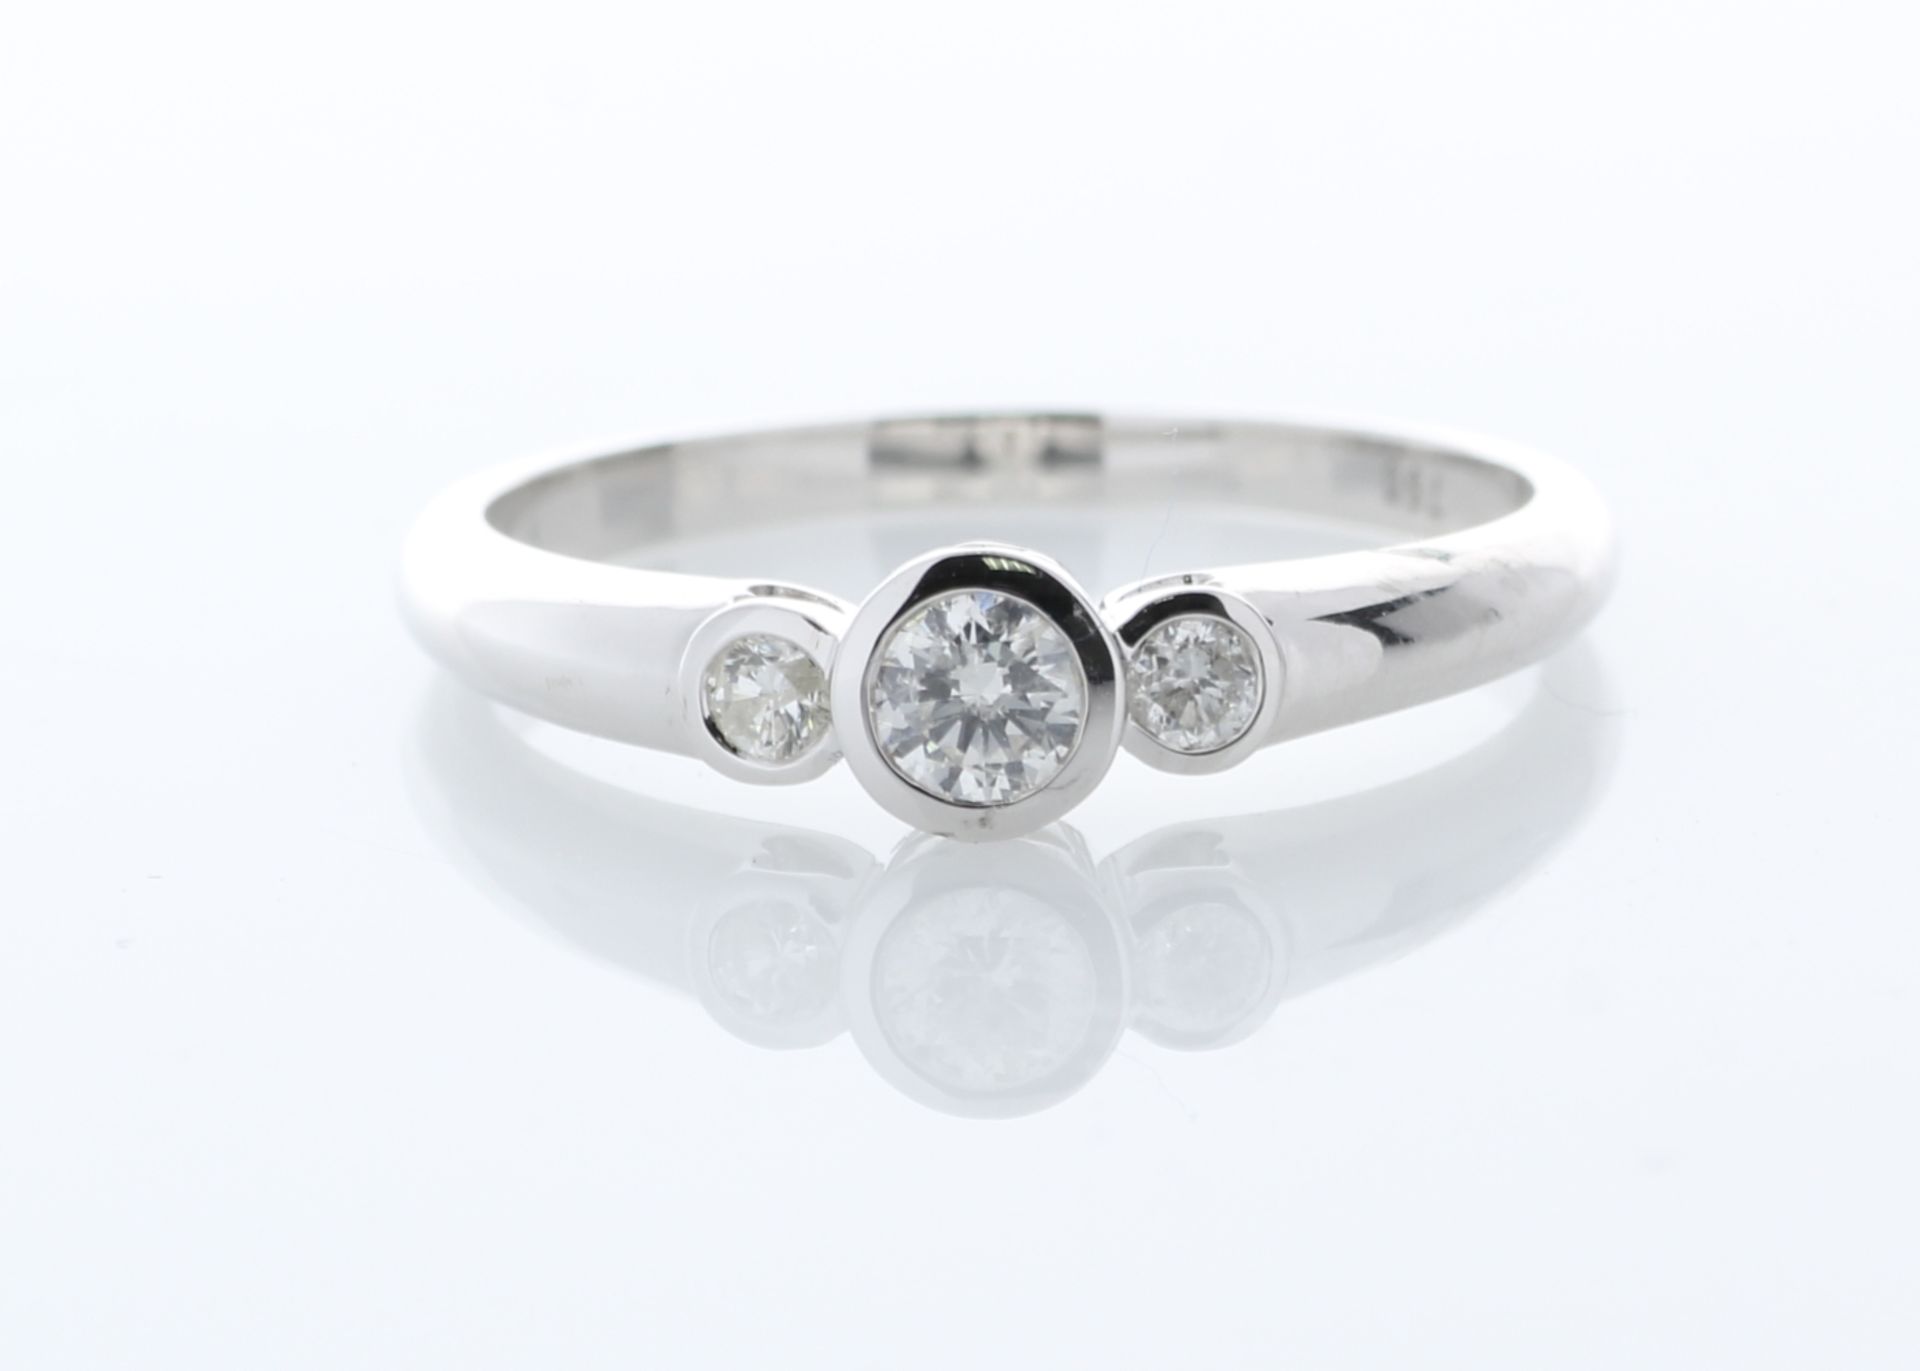 18ct Three Stone Rub Over Set Diamond Ring 0.33 Carats - Valued by GIE £9,555.00 - Three natural